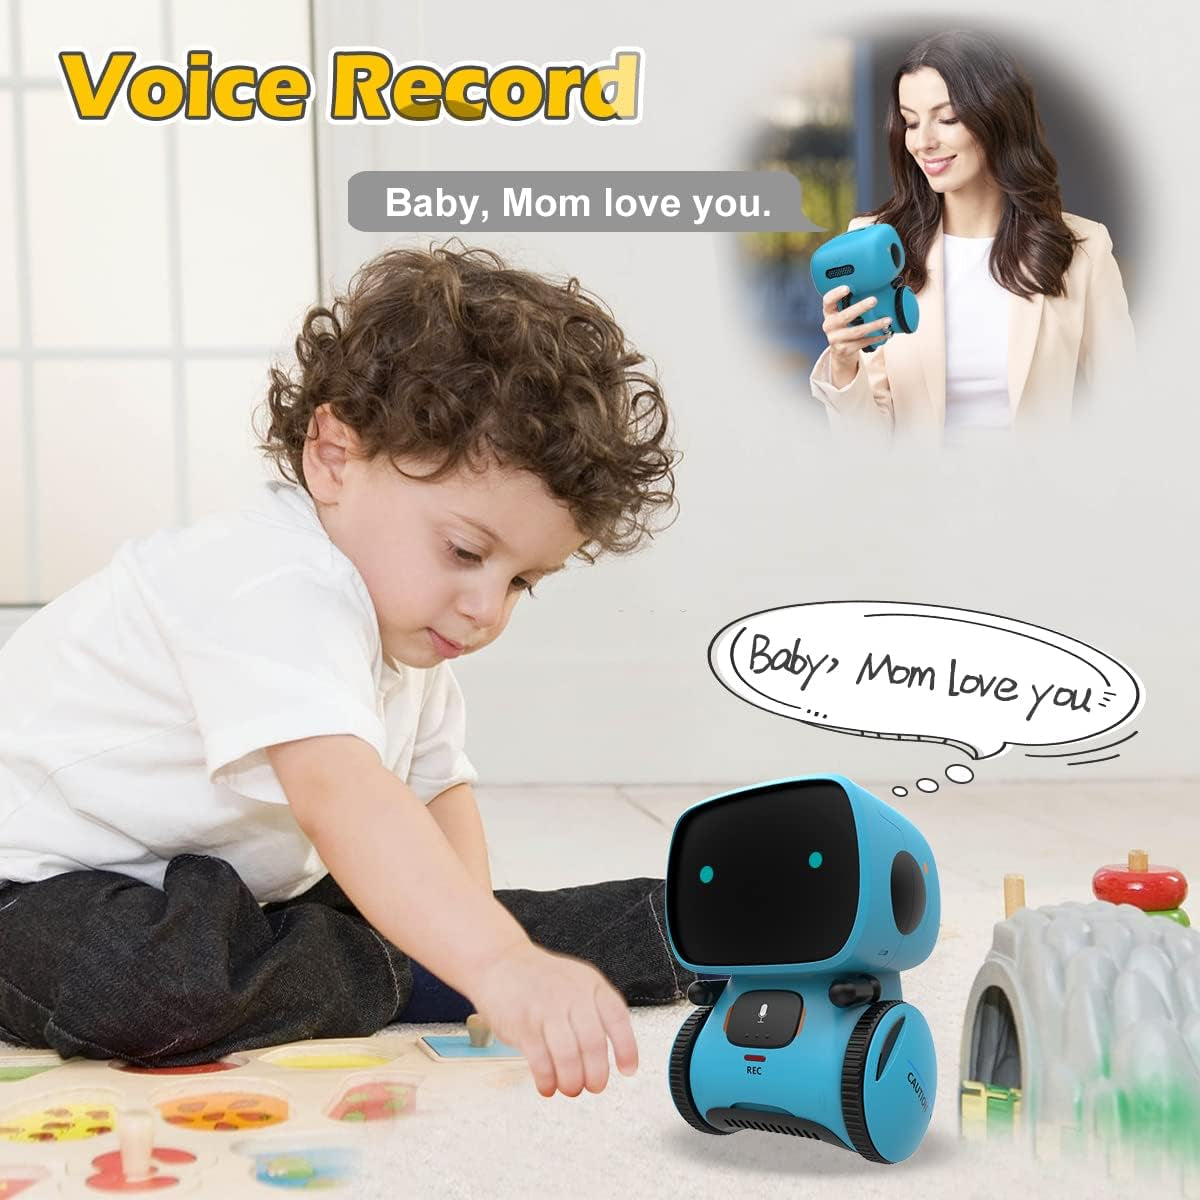 Robots for Kids, Interactive Smart Robotic with Touch Sensor, Voice Control, Speech Recognition, Singing, Dancing, Repeating and Recording, Robot Toy for 3 4 5 6 7 8 Year Old Boys Girls